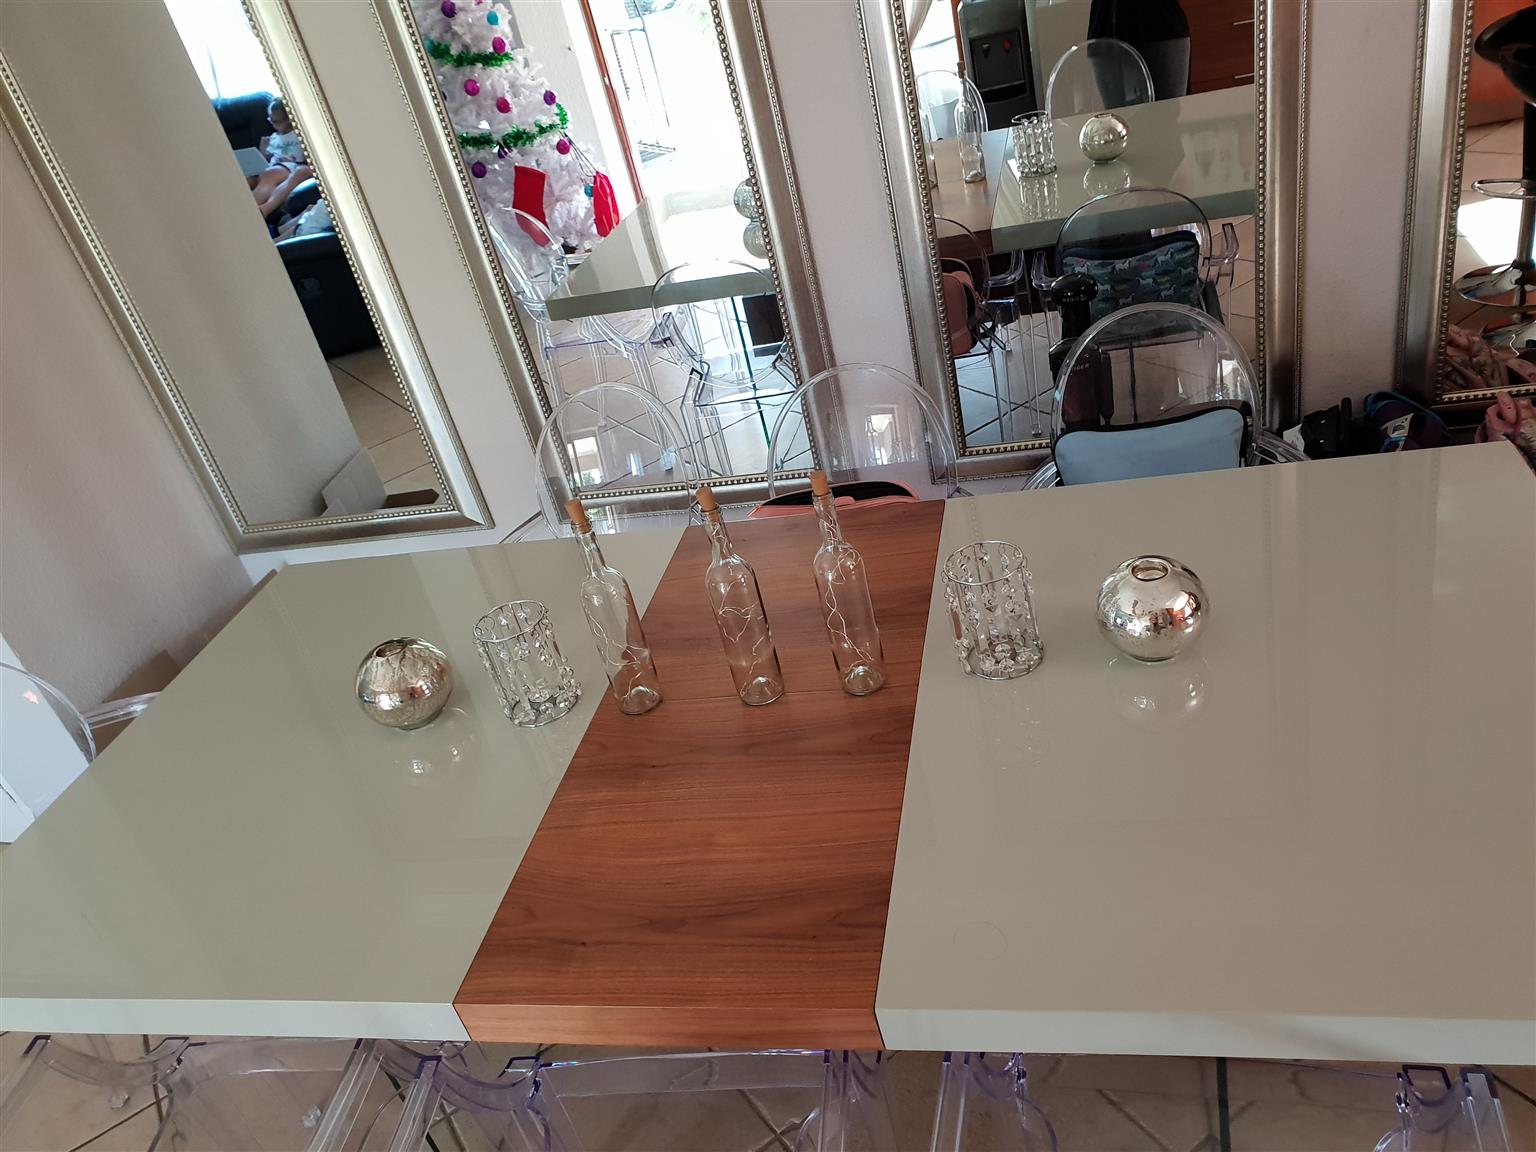 Dining table with server